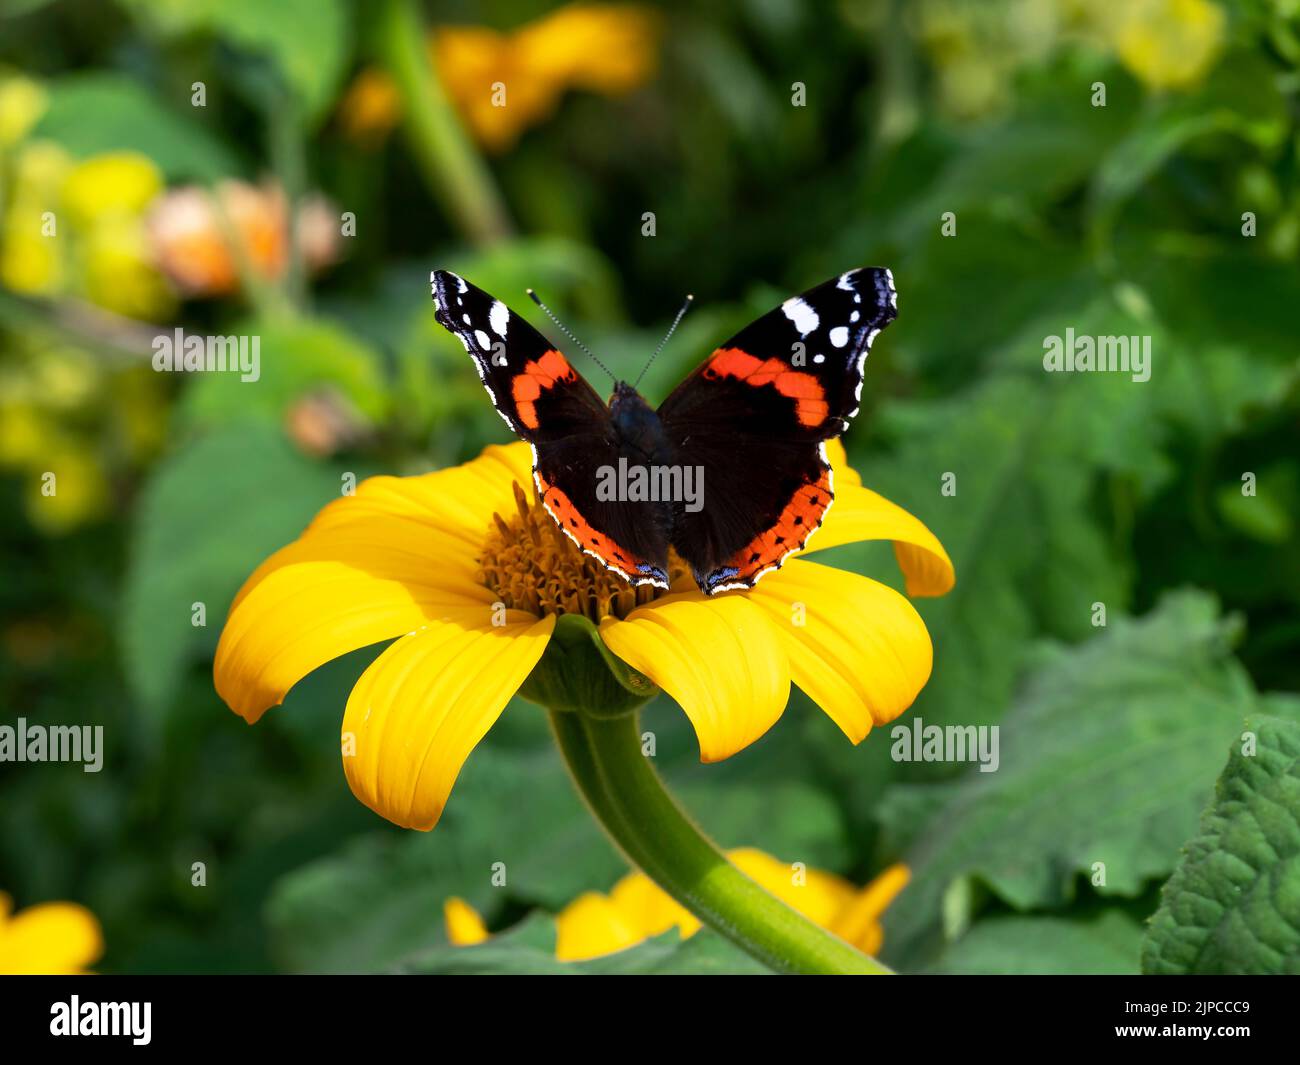 Red admiral butterfly on a yellow sunflower Stock Photo